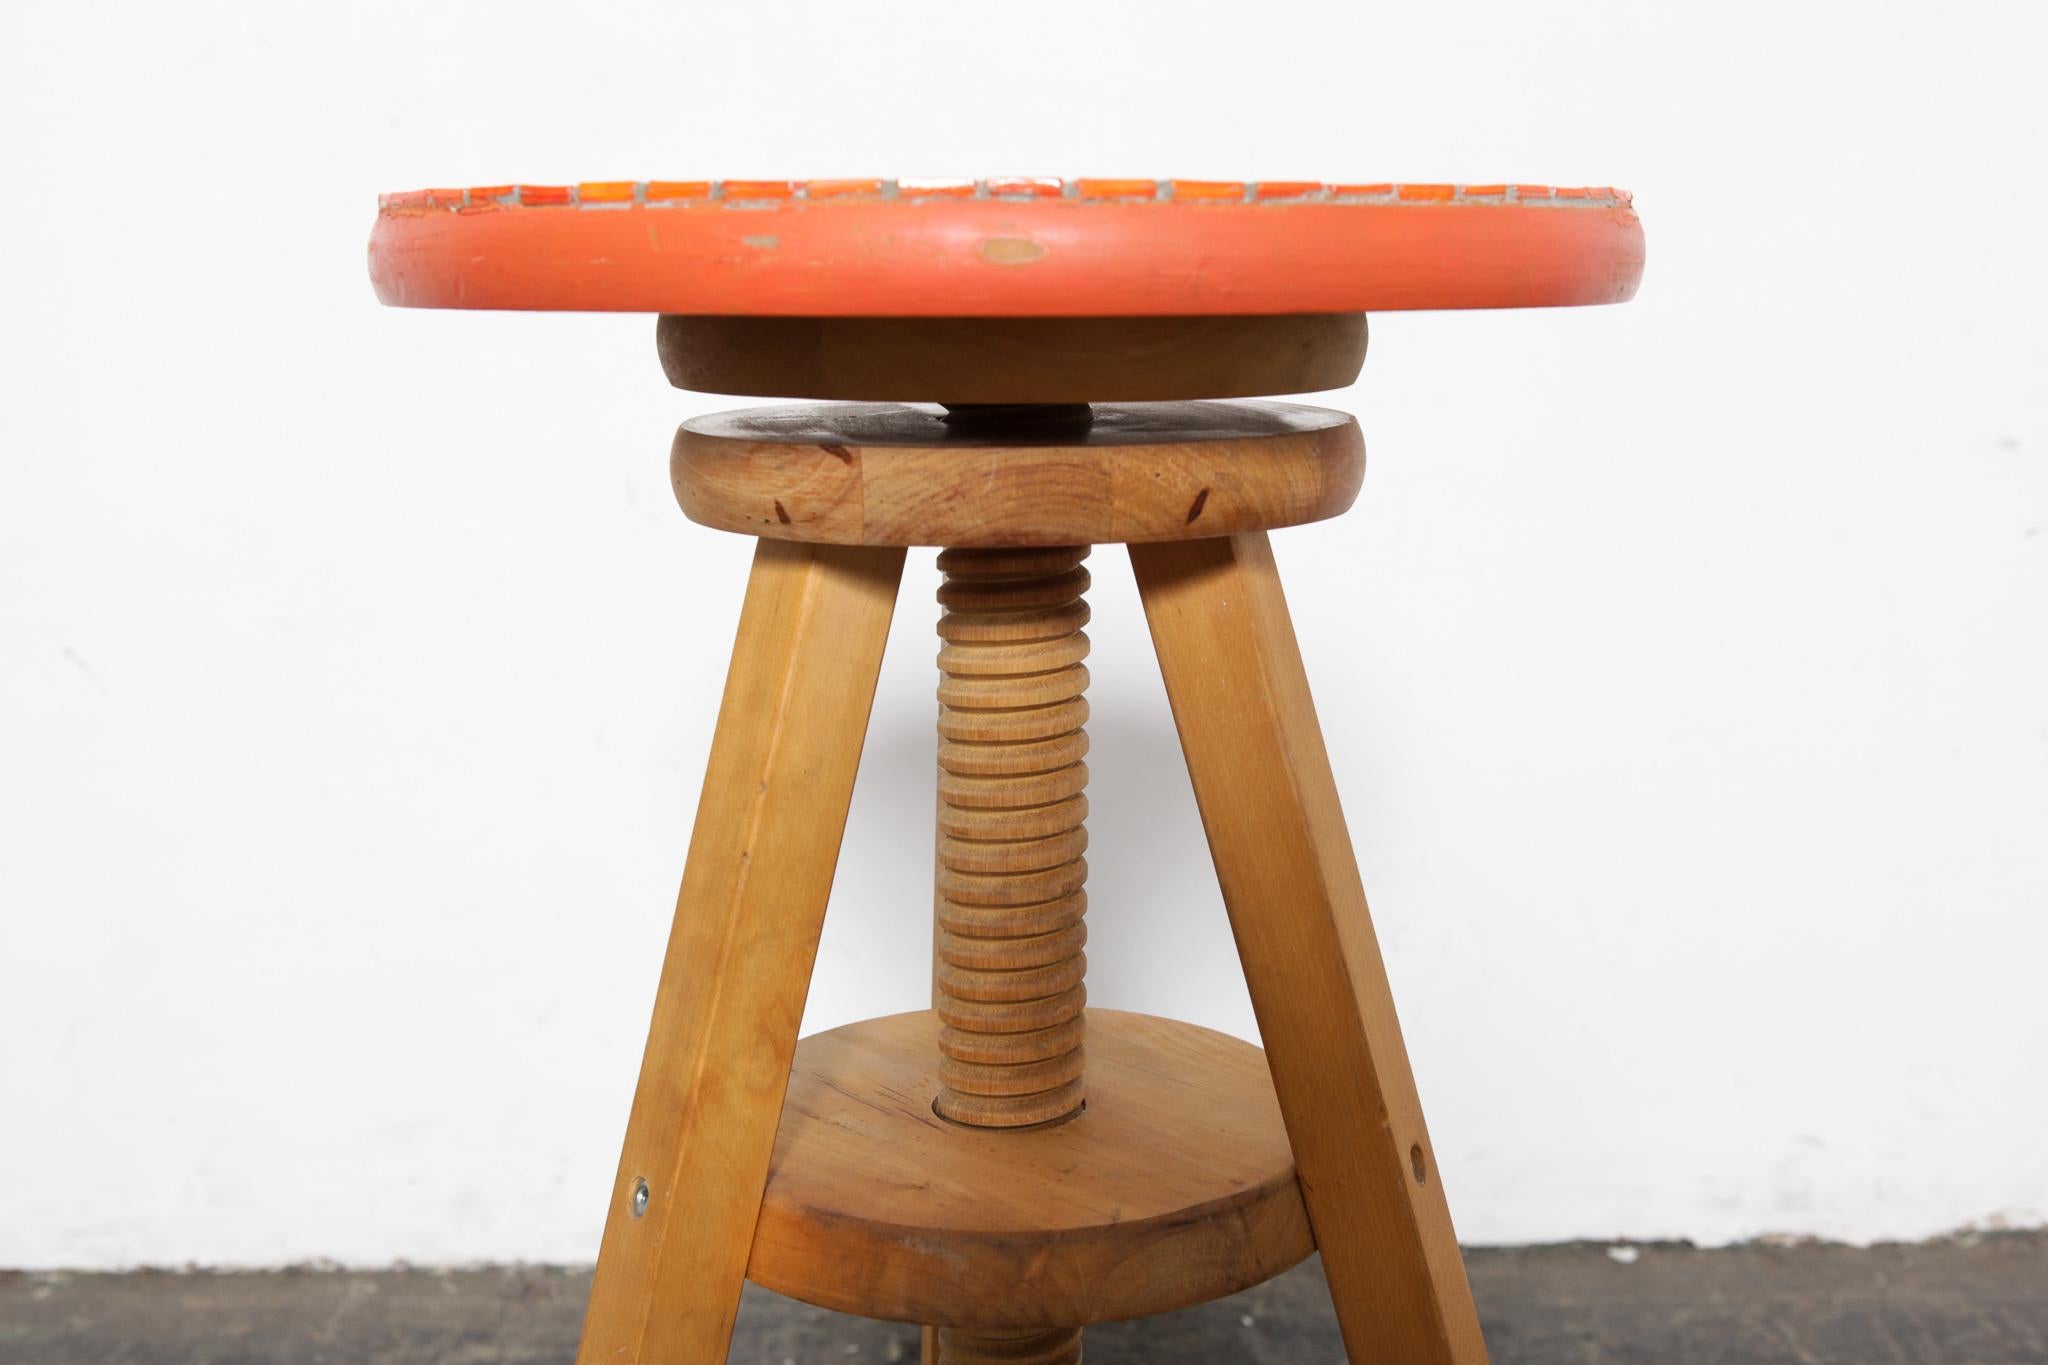 Oiled Adjustable Stool from Finland with Mosaic Tile Seat by Designer Martin Cheek For Sale